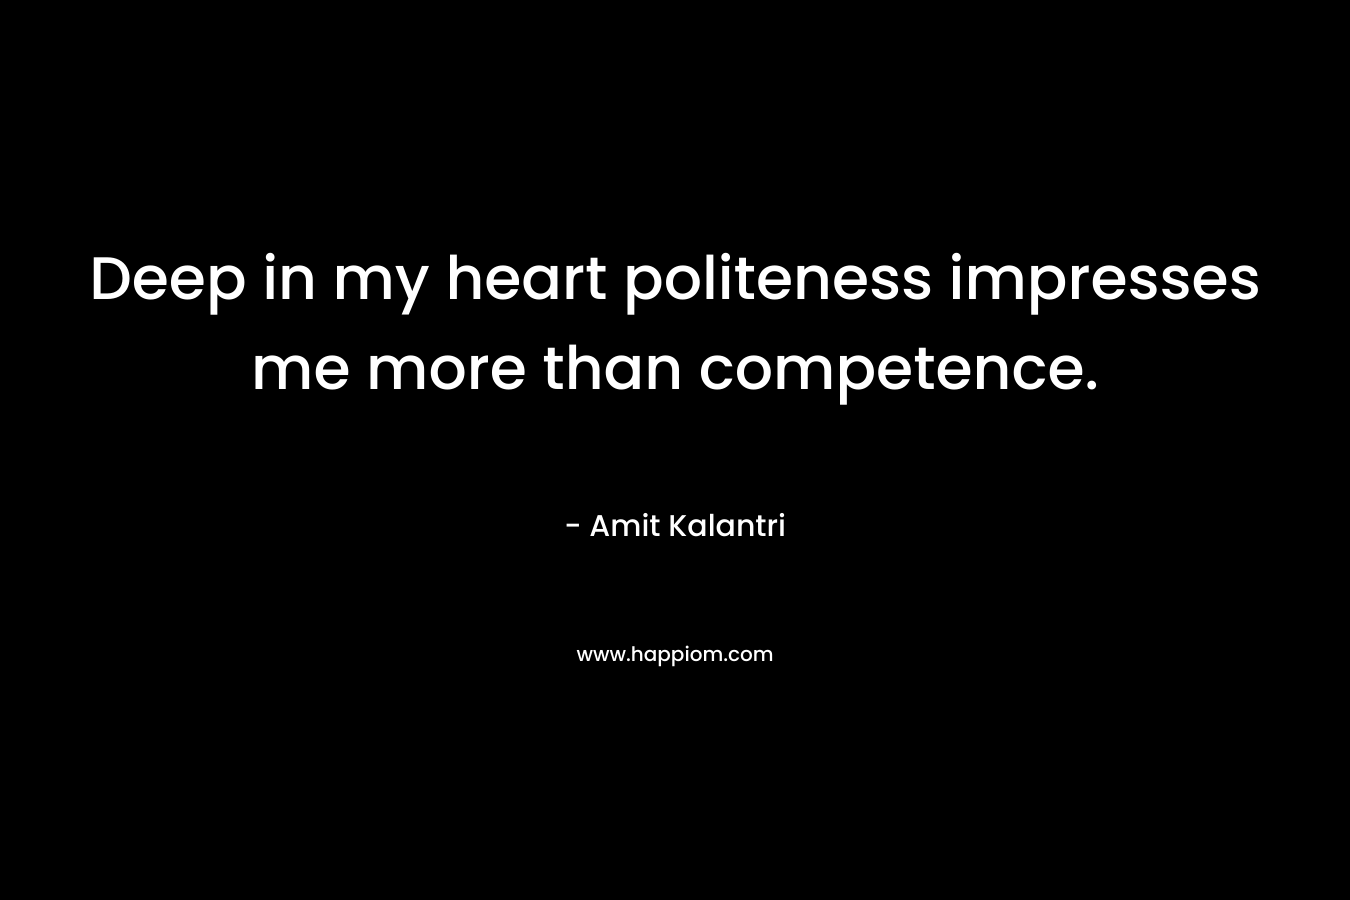 Deep in my heart politeness impresses me more than competence.